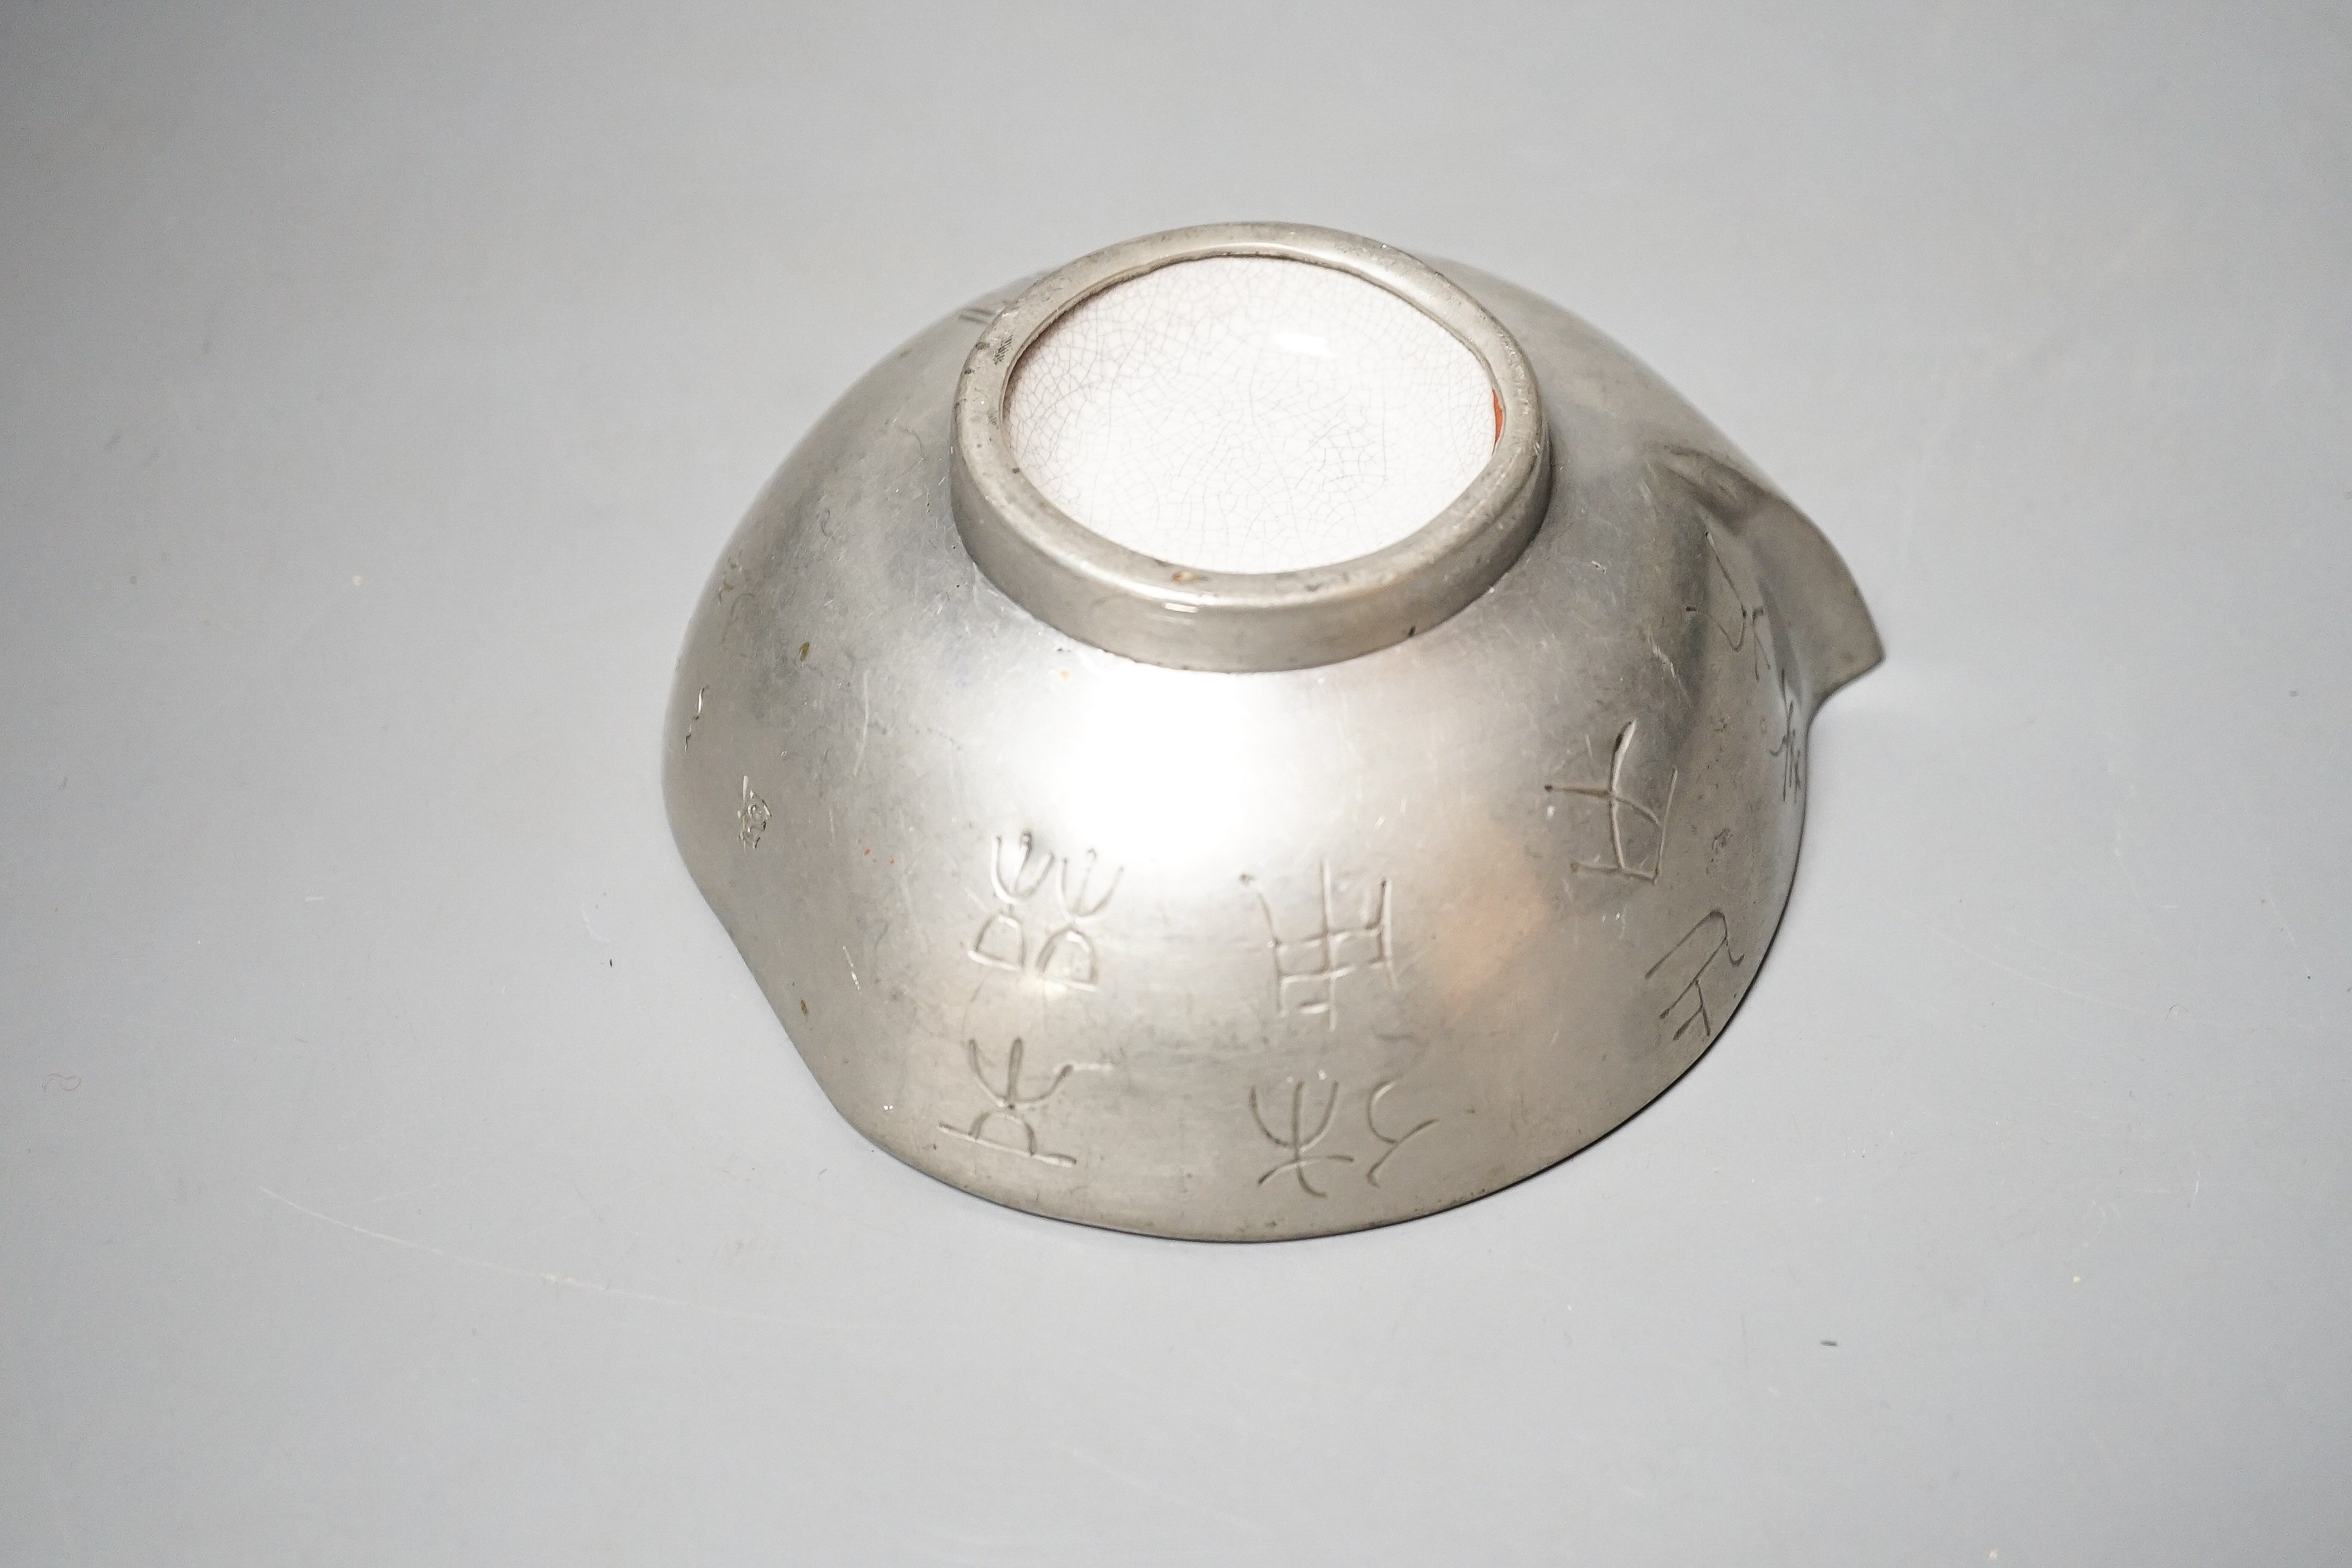 A Chinese Yixing pottery and pewter mounted peach shaped cup, late 19th century, length 13cm